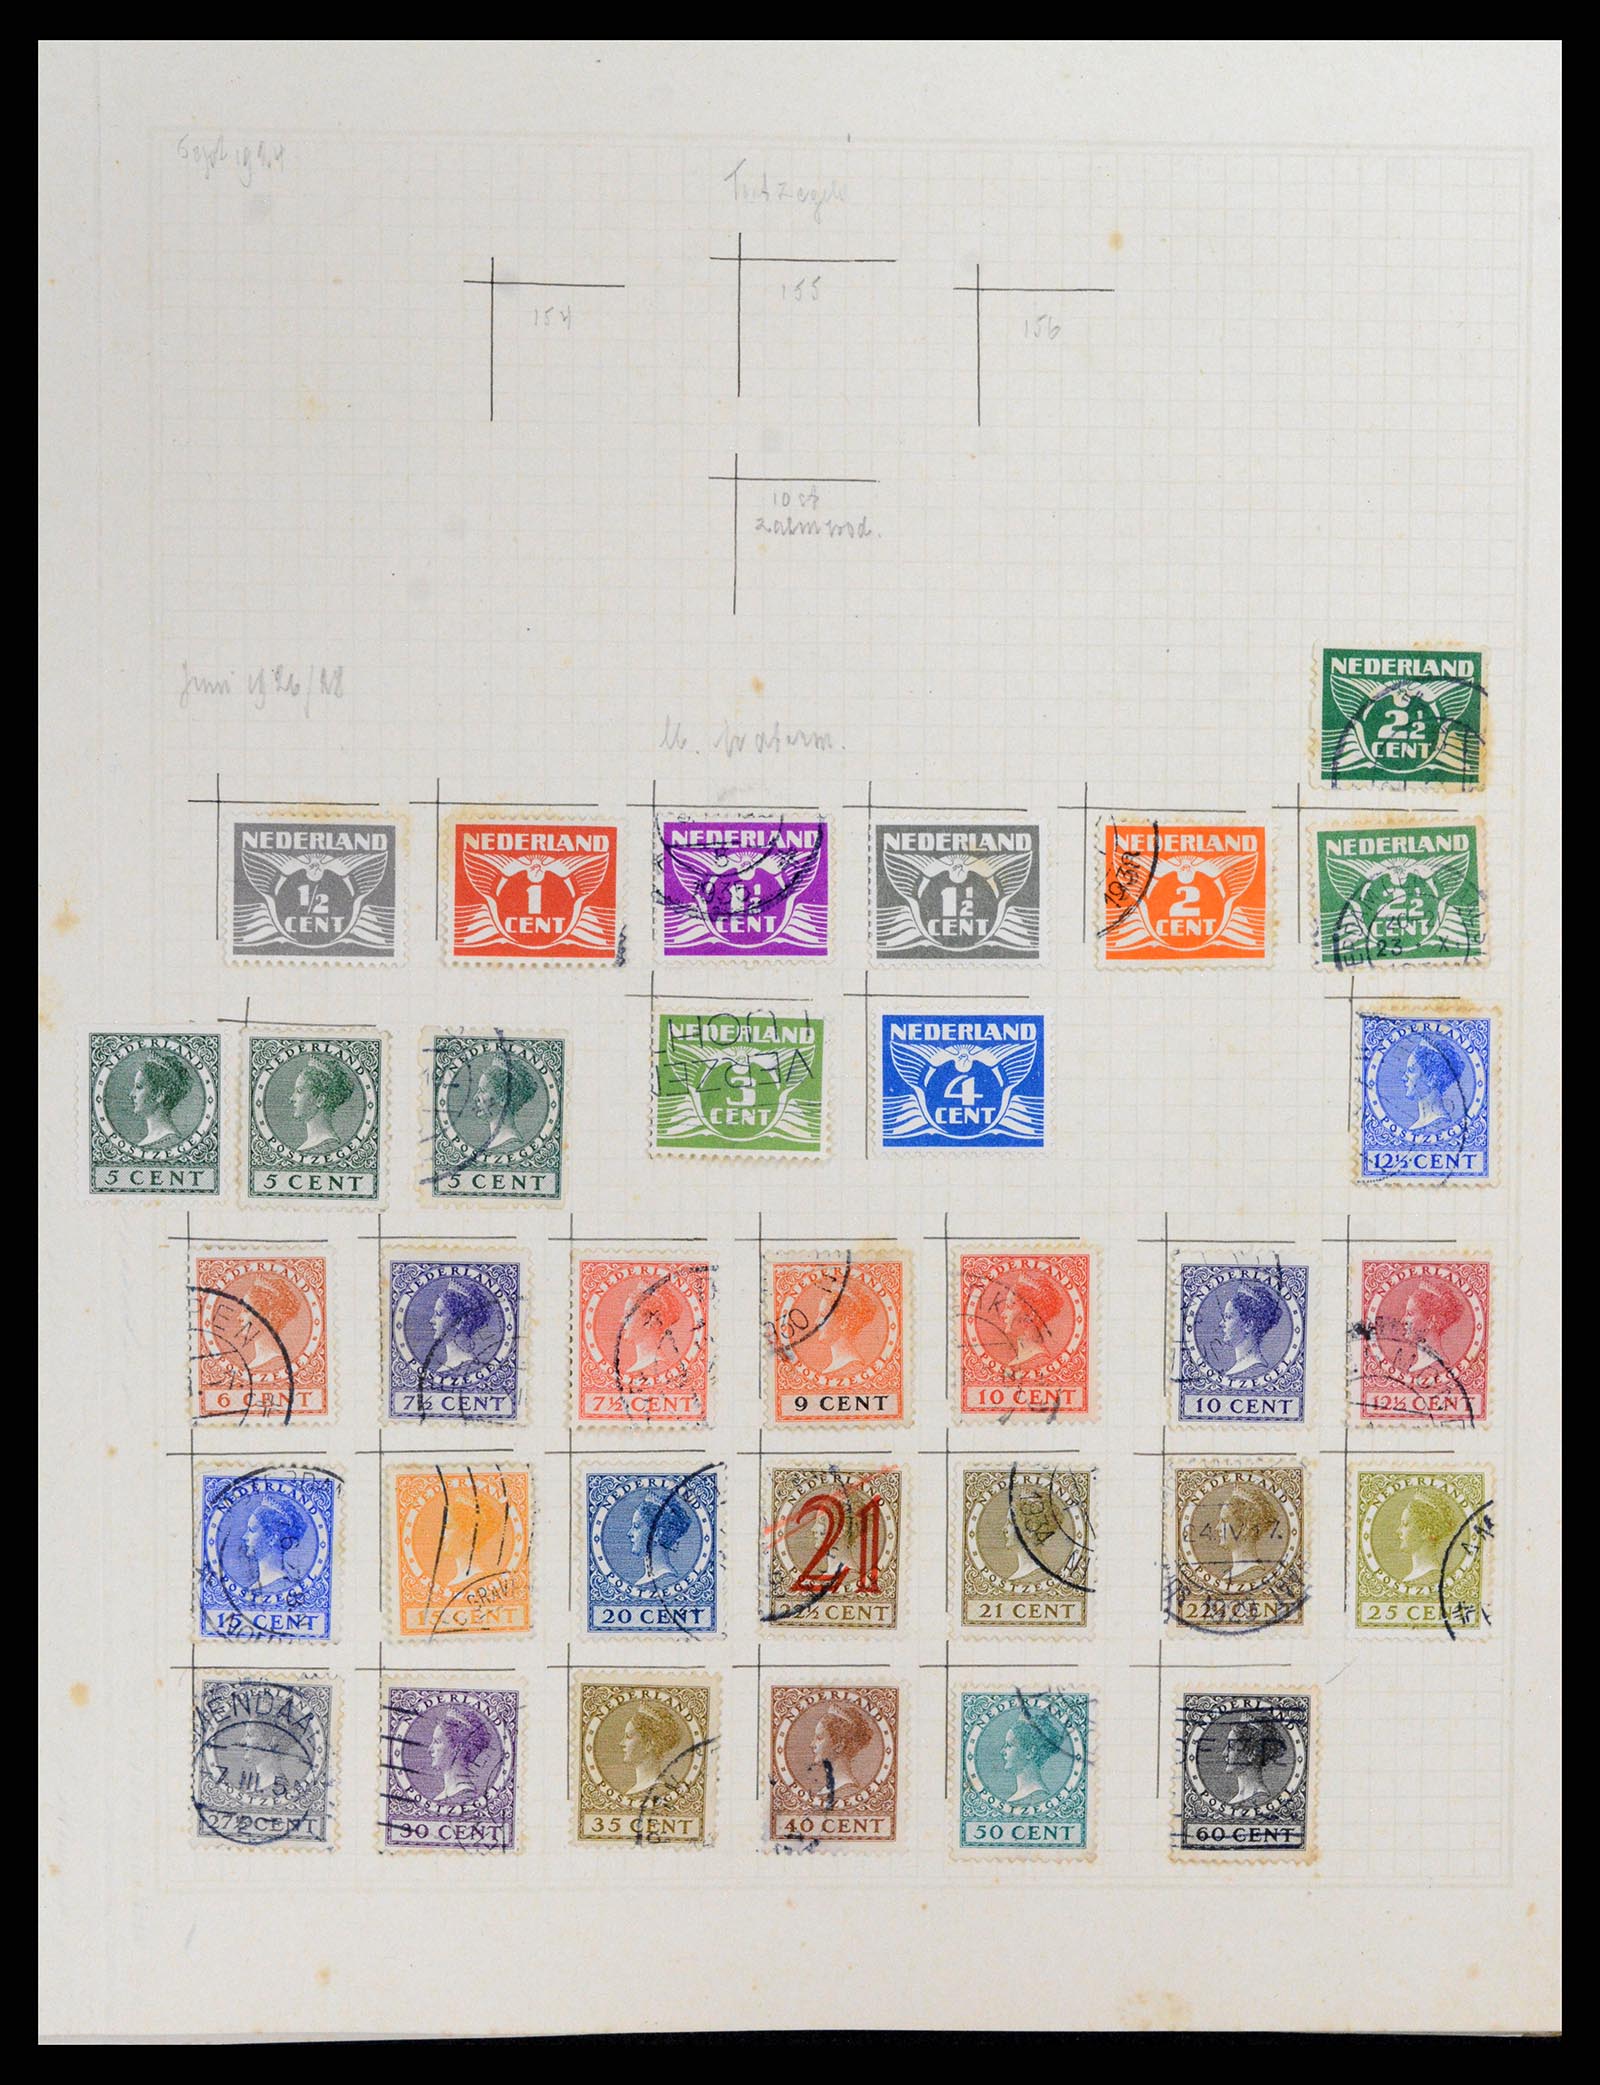 37868 010 - Stamp Collection 37868 Netherlands and territories 1864-1950.